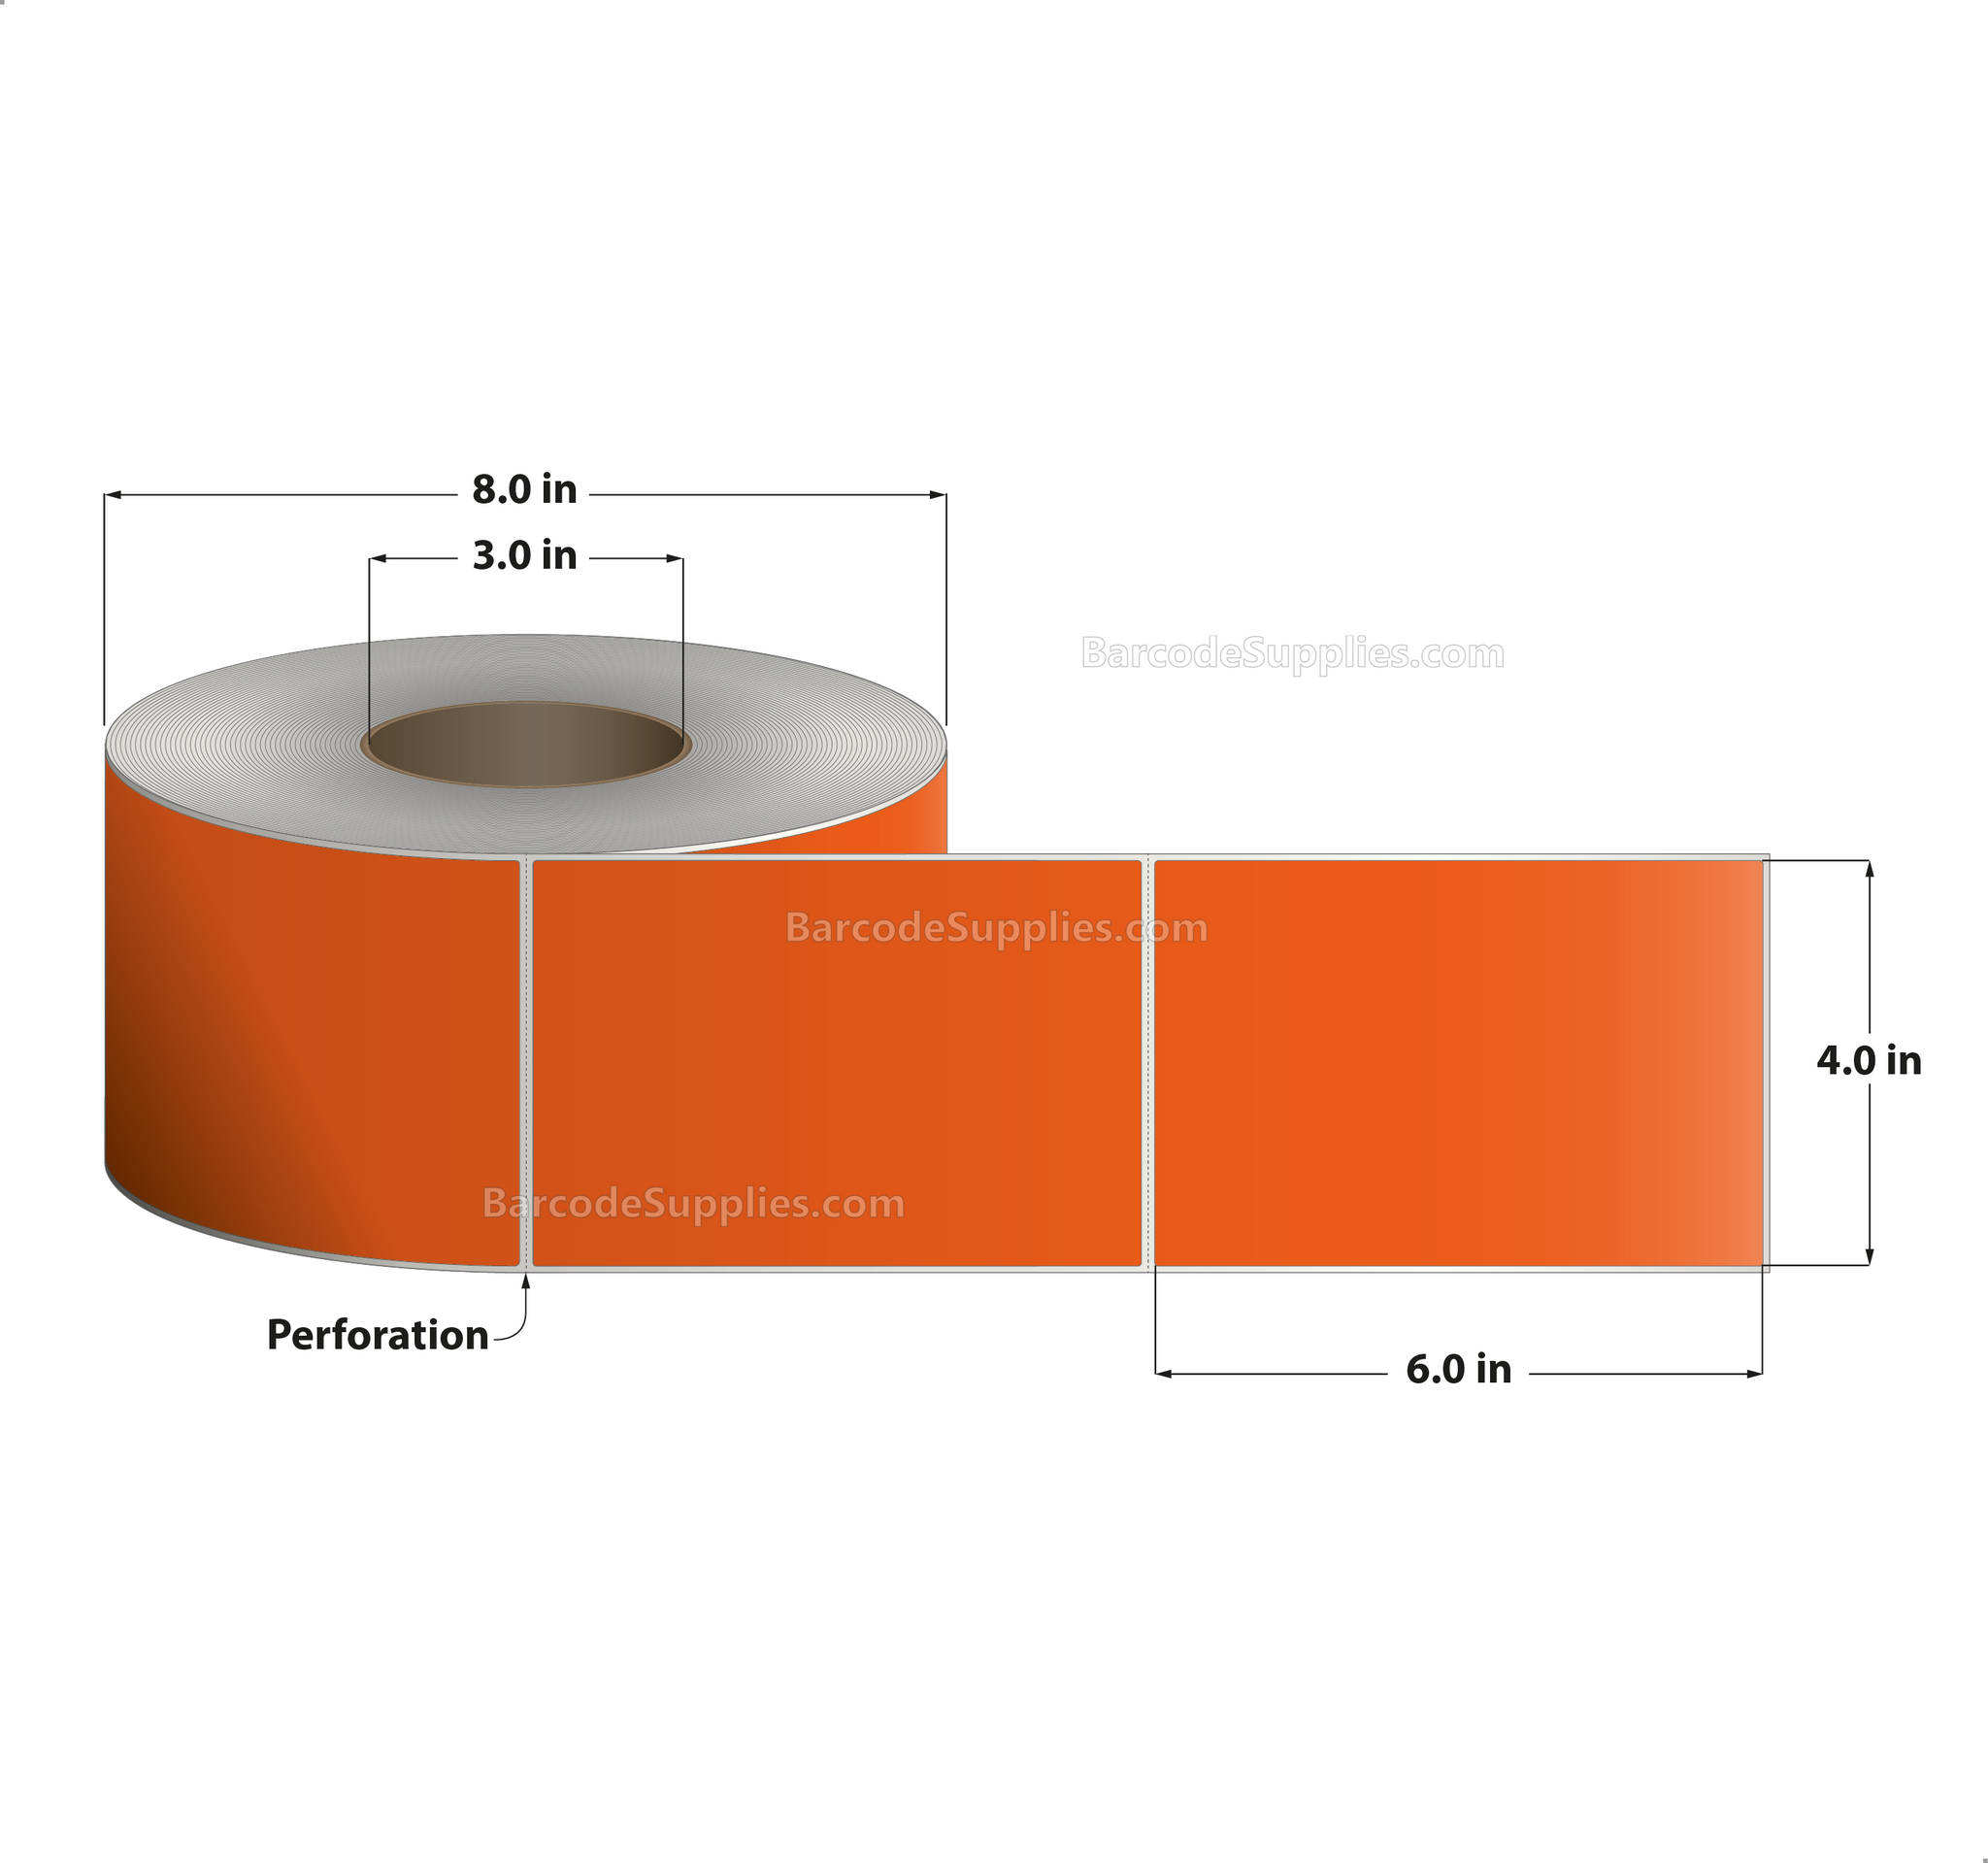 4 x 6 Thermal Transfer 1495 Orange Labels With Permanent Adhesive - Perforated - 1000 Labels Per Roll - Carton Of 4 Rolls - 4000 Labels Total - MPN: RFC-4-6-1000-OR